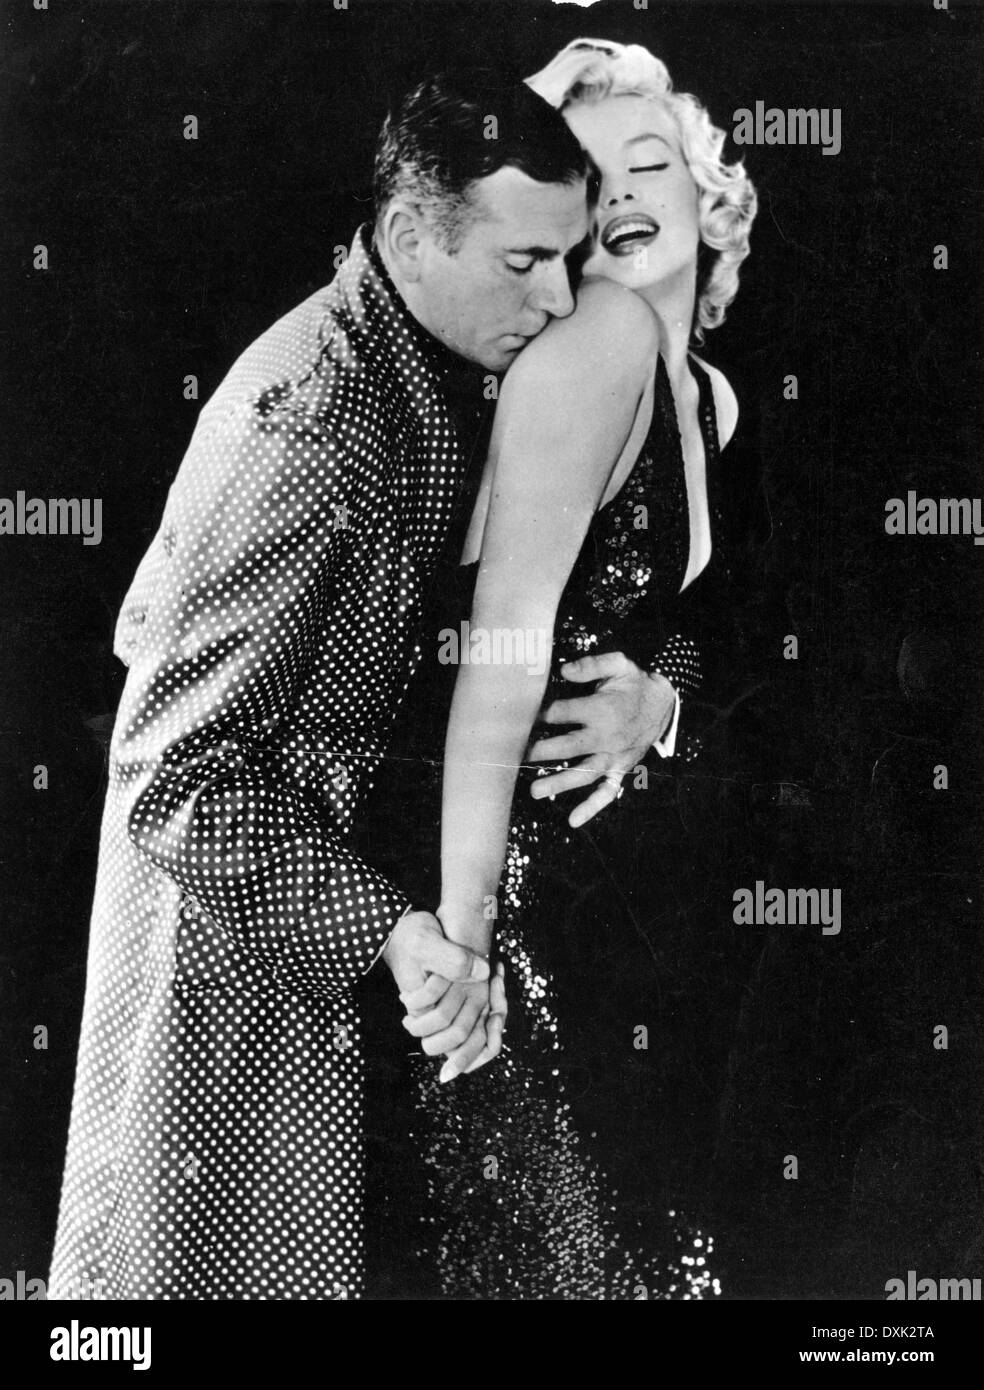 The prince and the showgirl Black and White Stock Photos & Images - Alamy